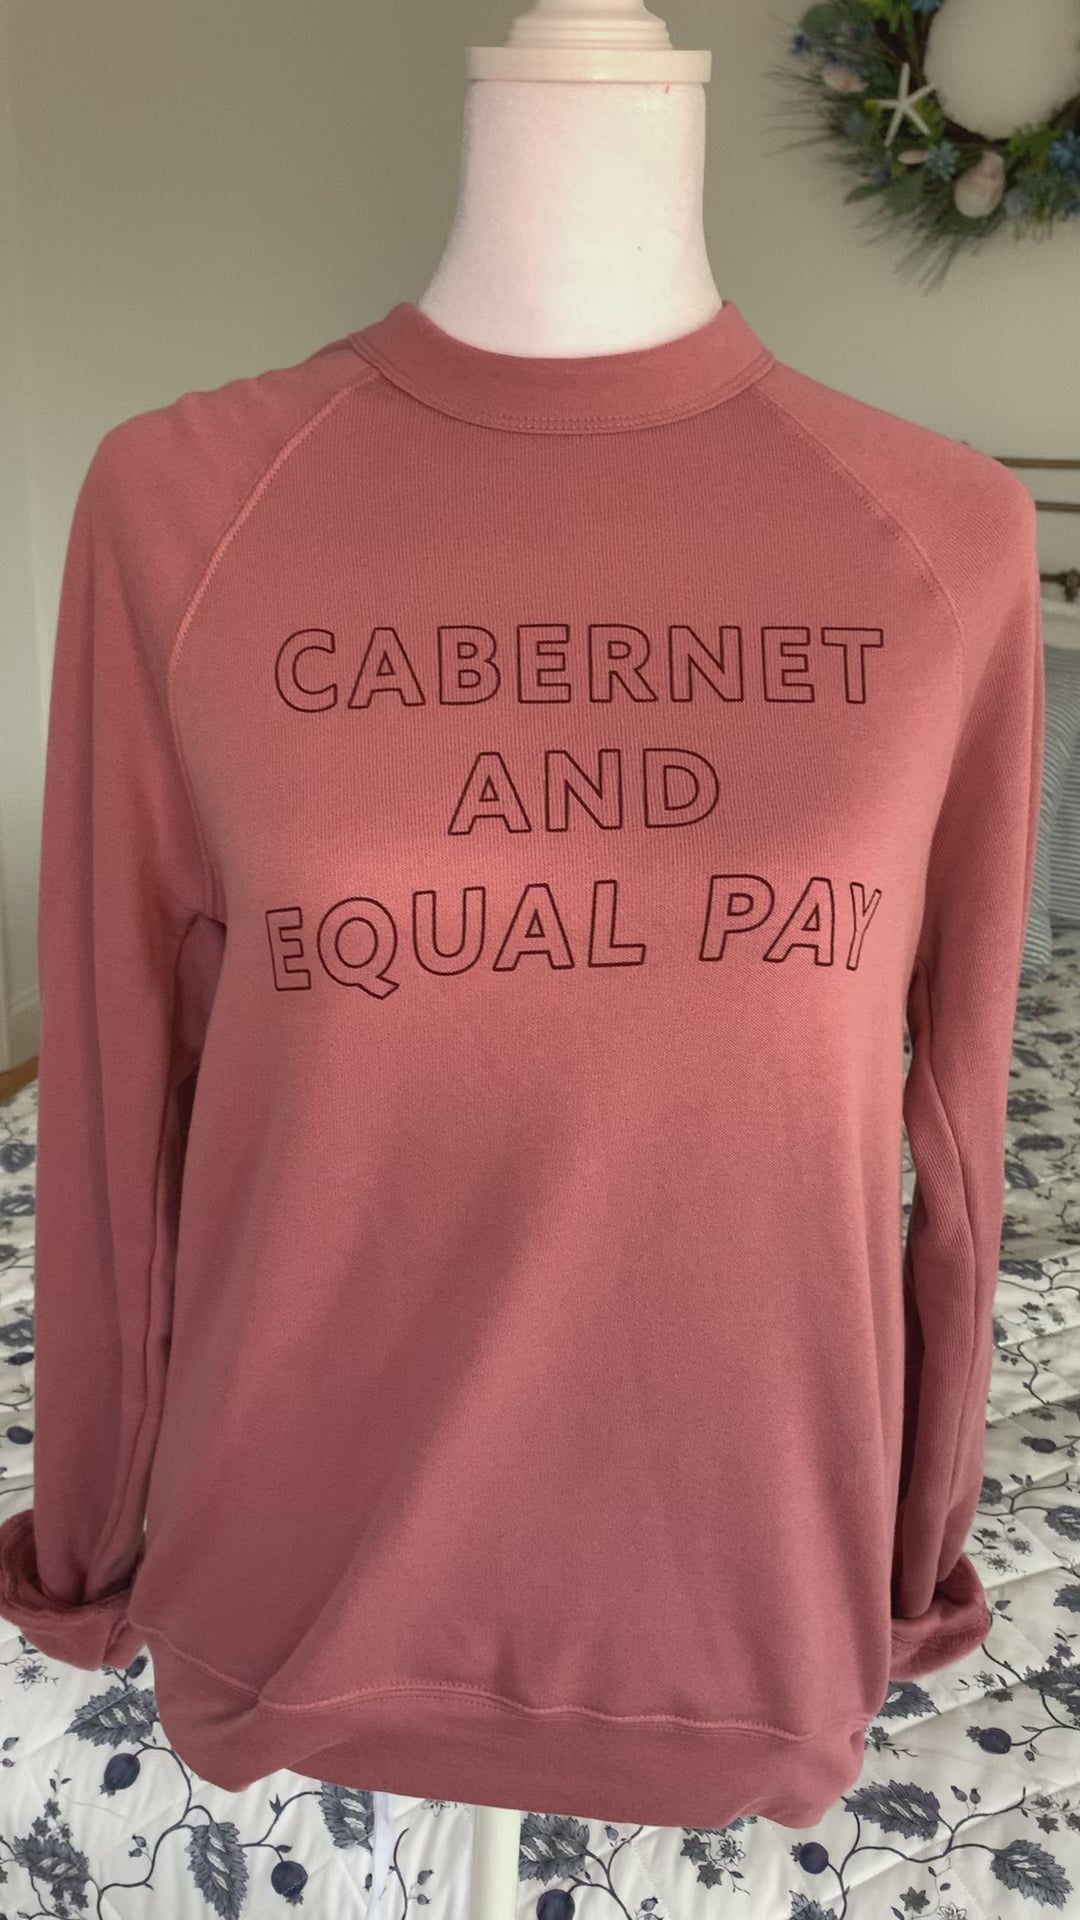 A mauve crewneck that reads "Cabernet and Equal Pay" hangs on a manikin 